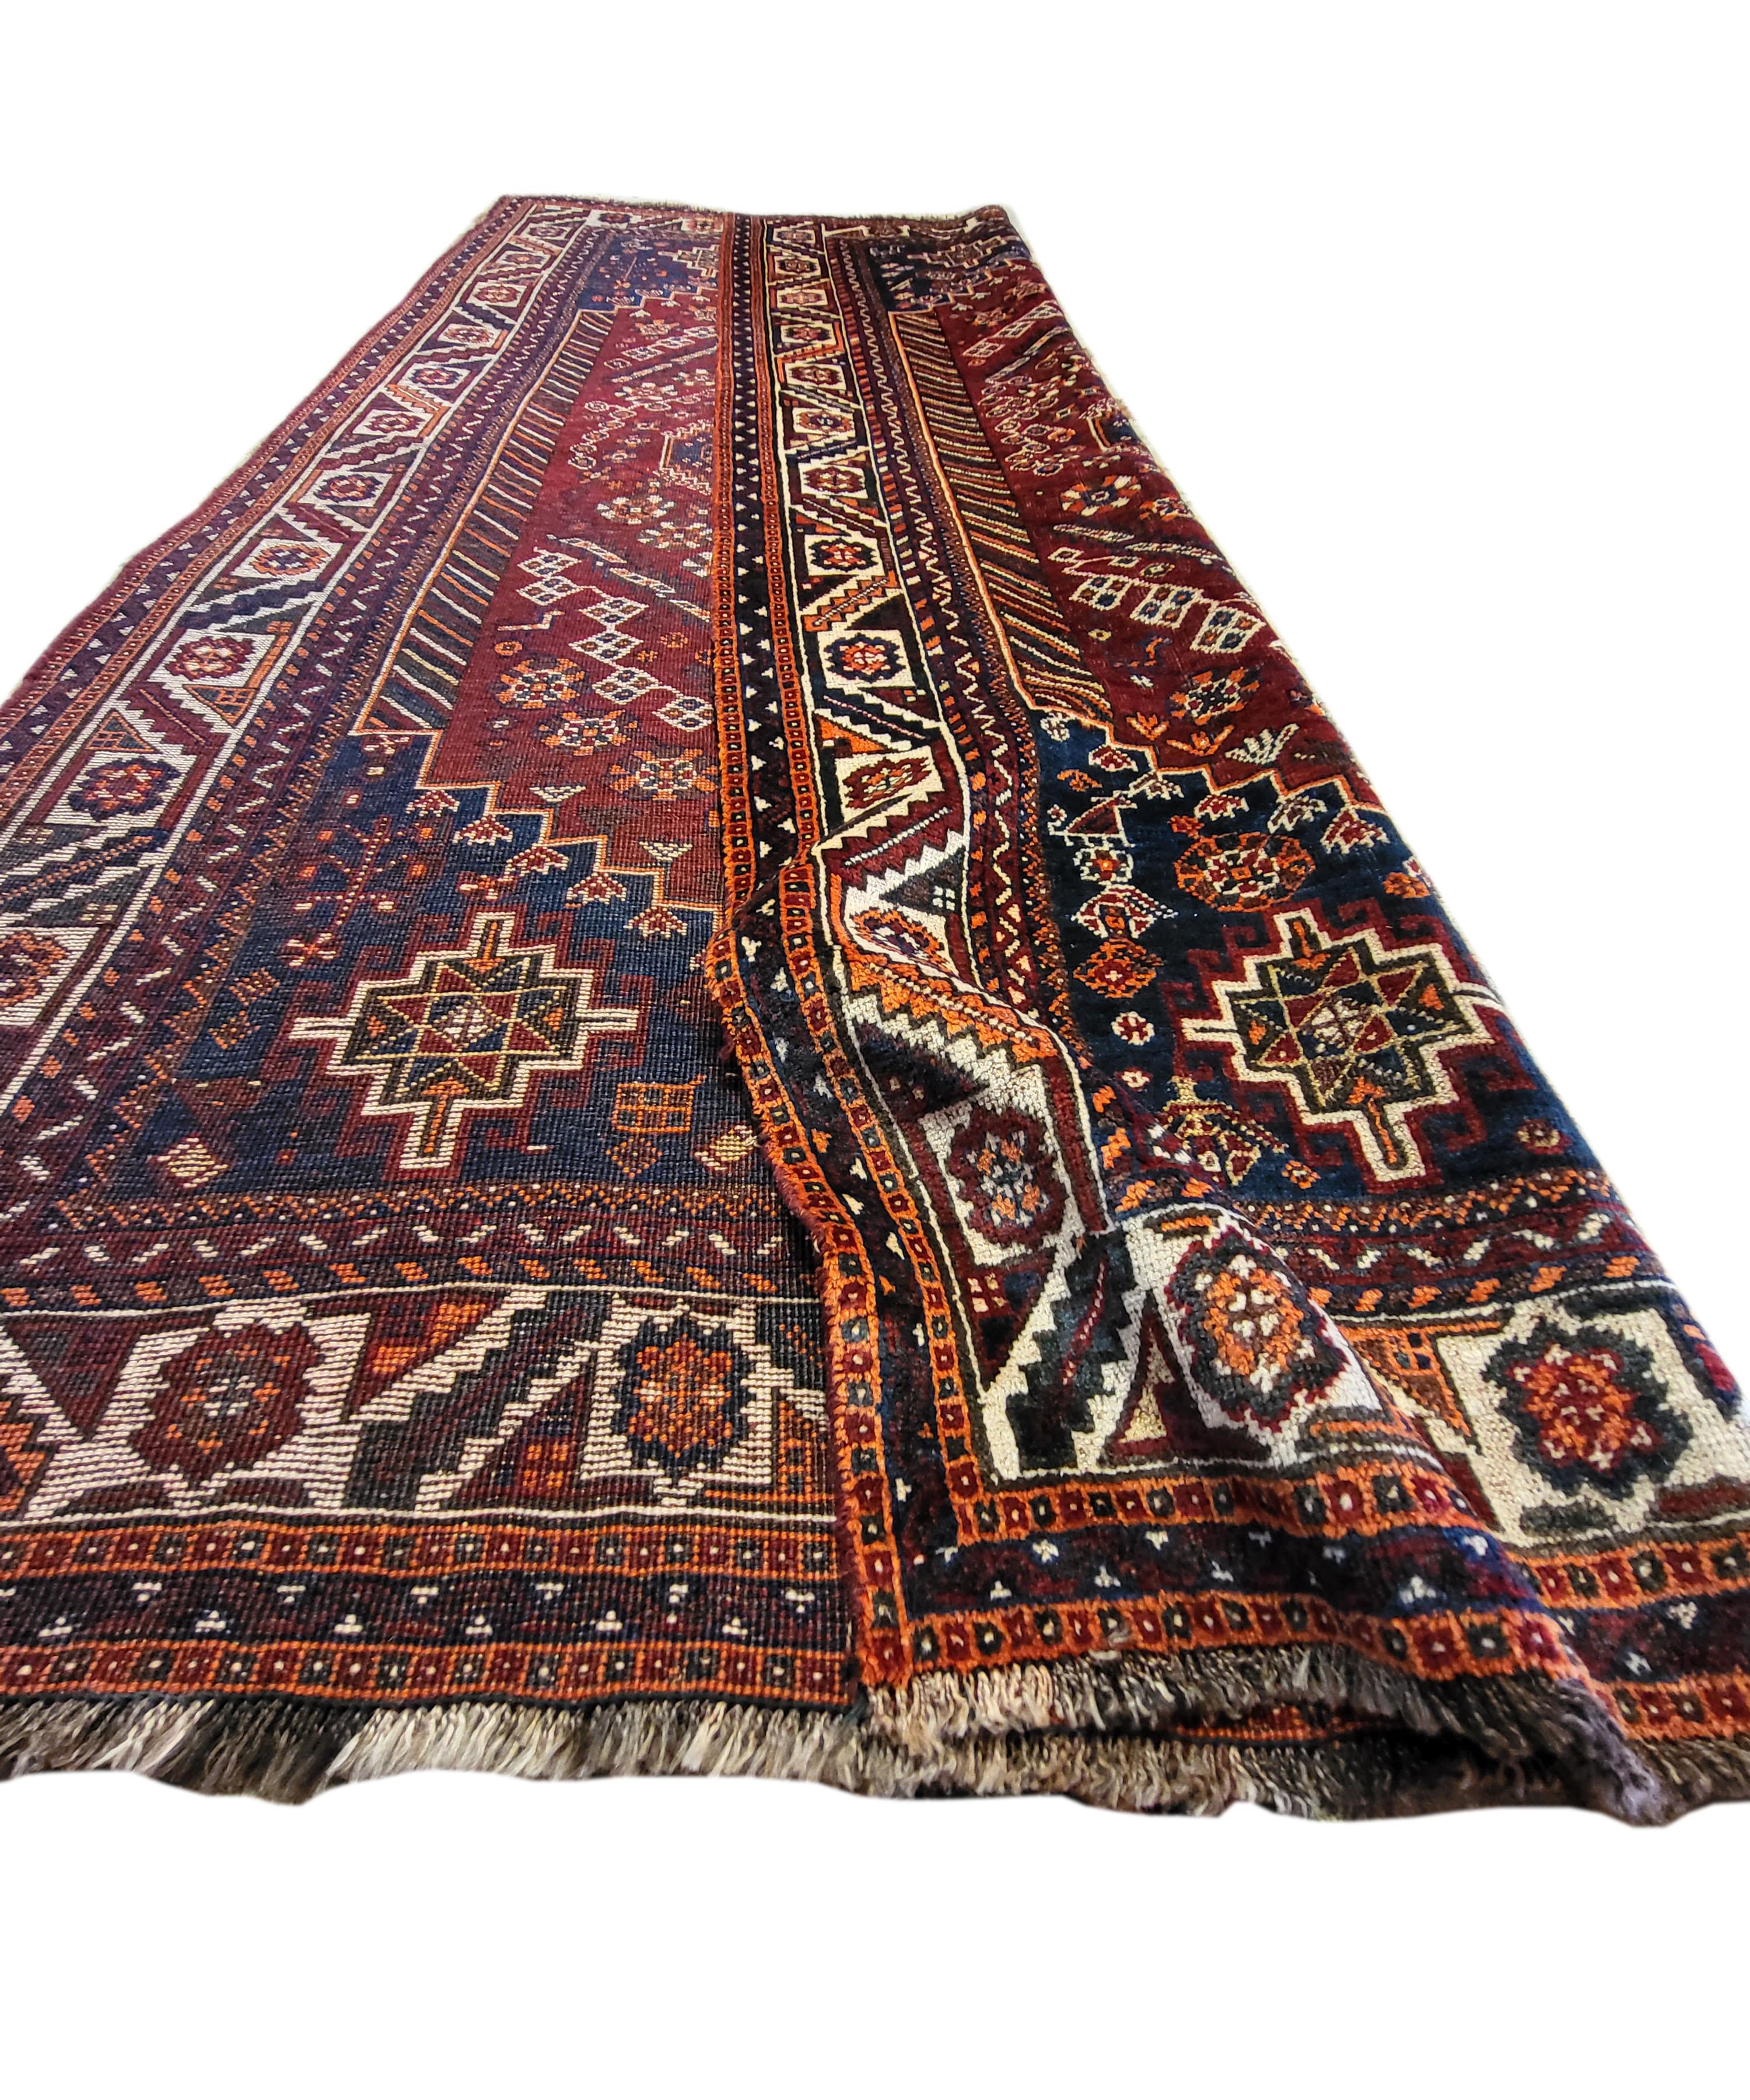 Hand-Knotted 5'x7' Antique Qashqai - Rahimi Persian Rug For Sale